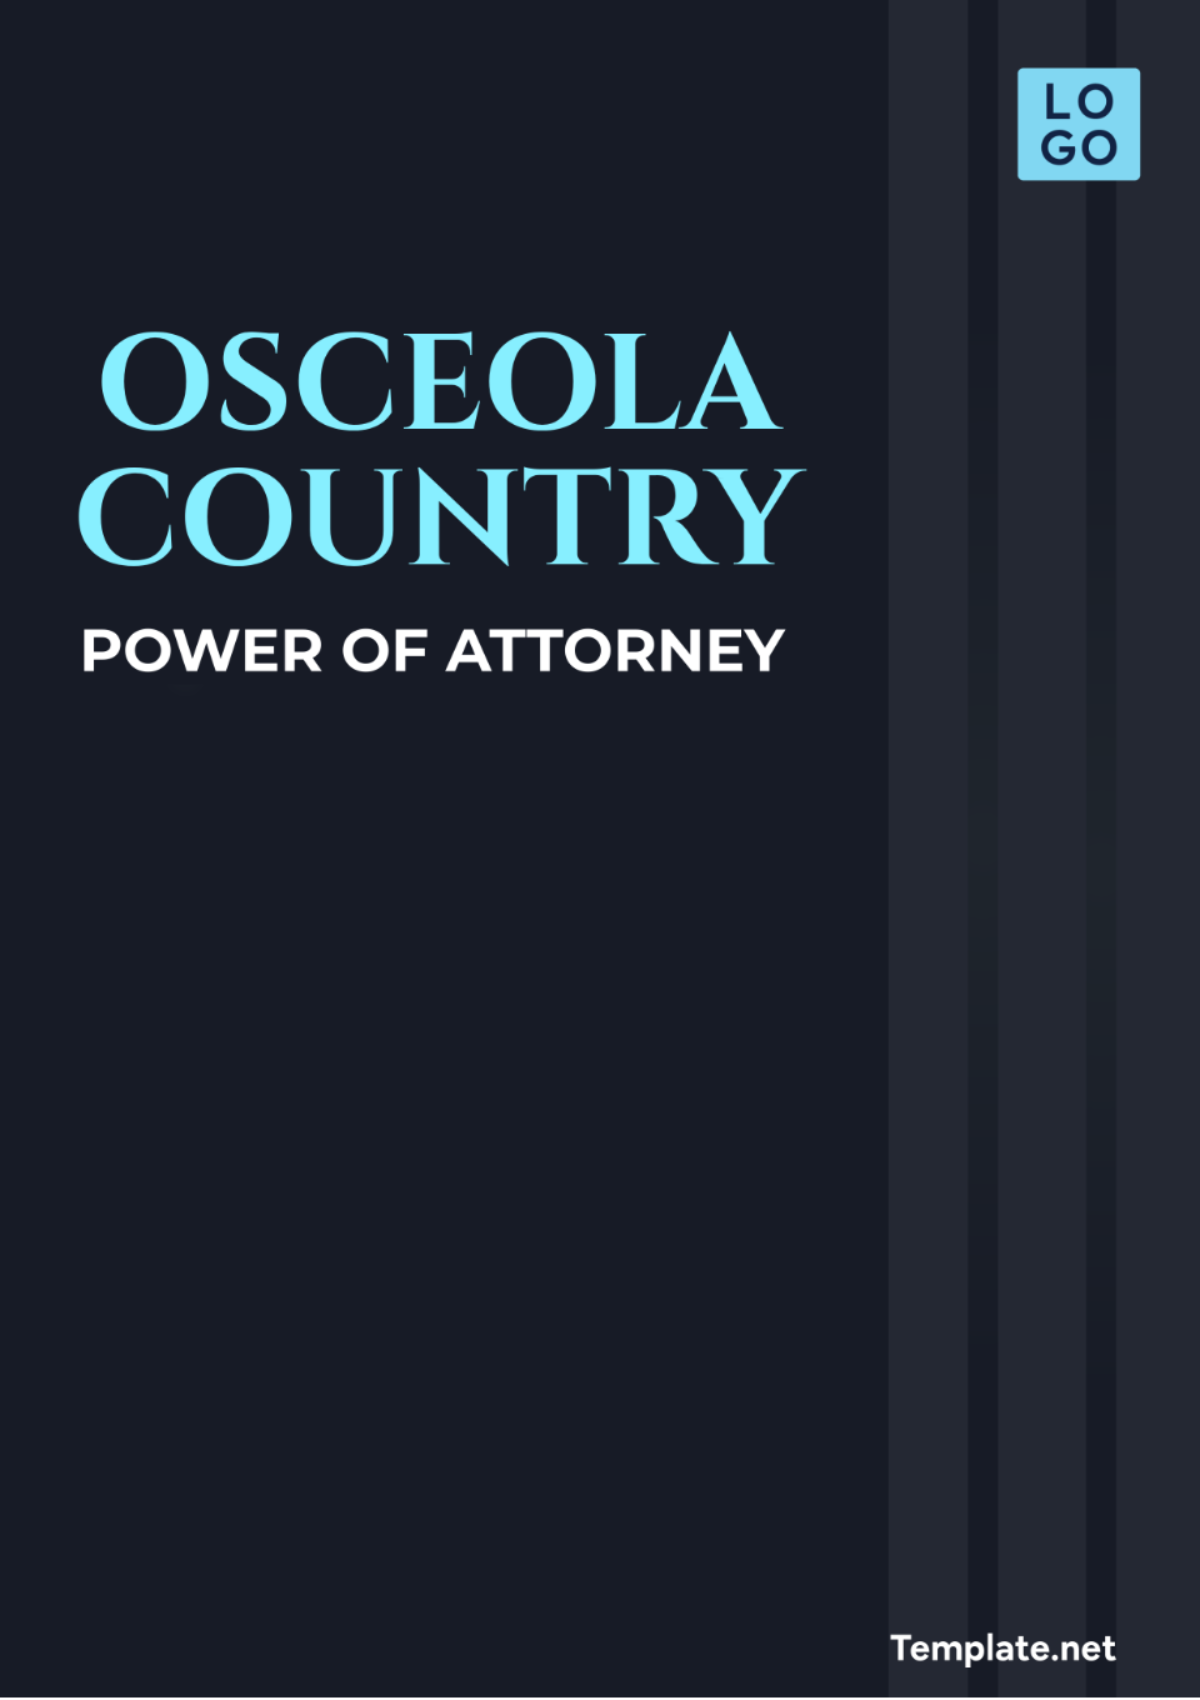 Osceola County Power of Attorney Template